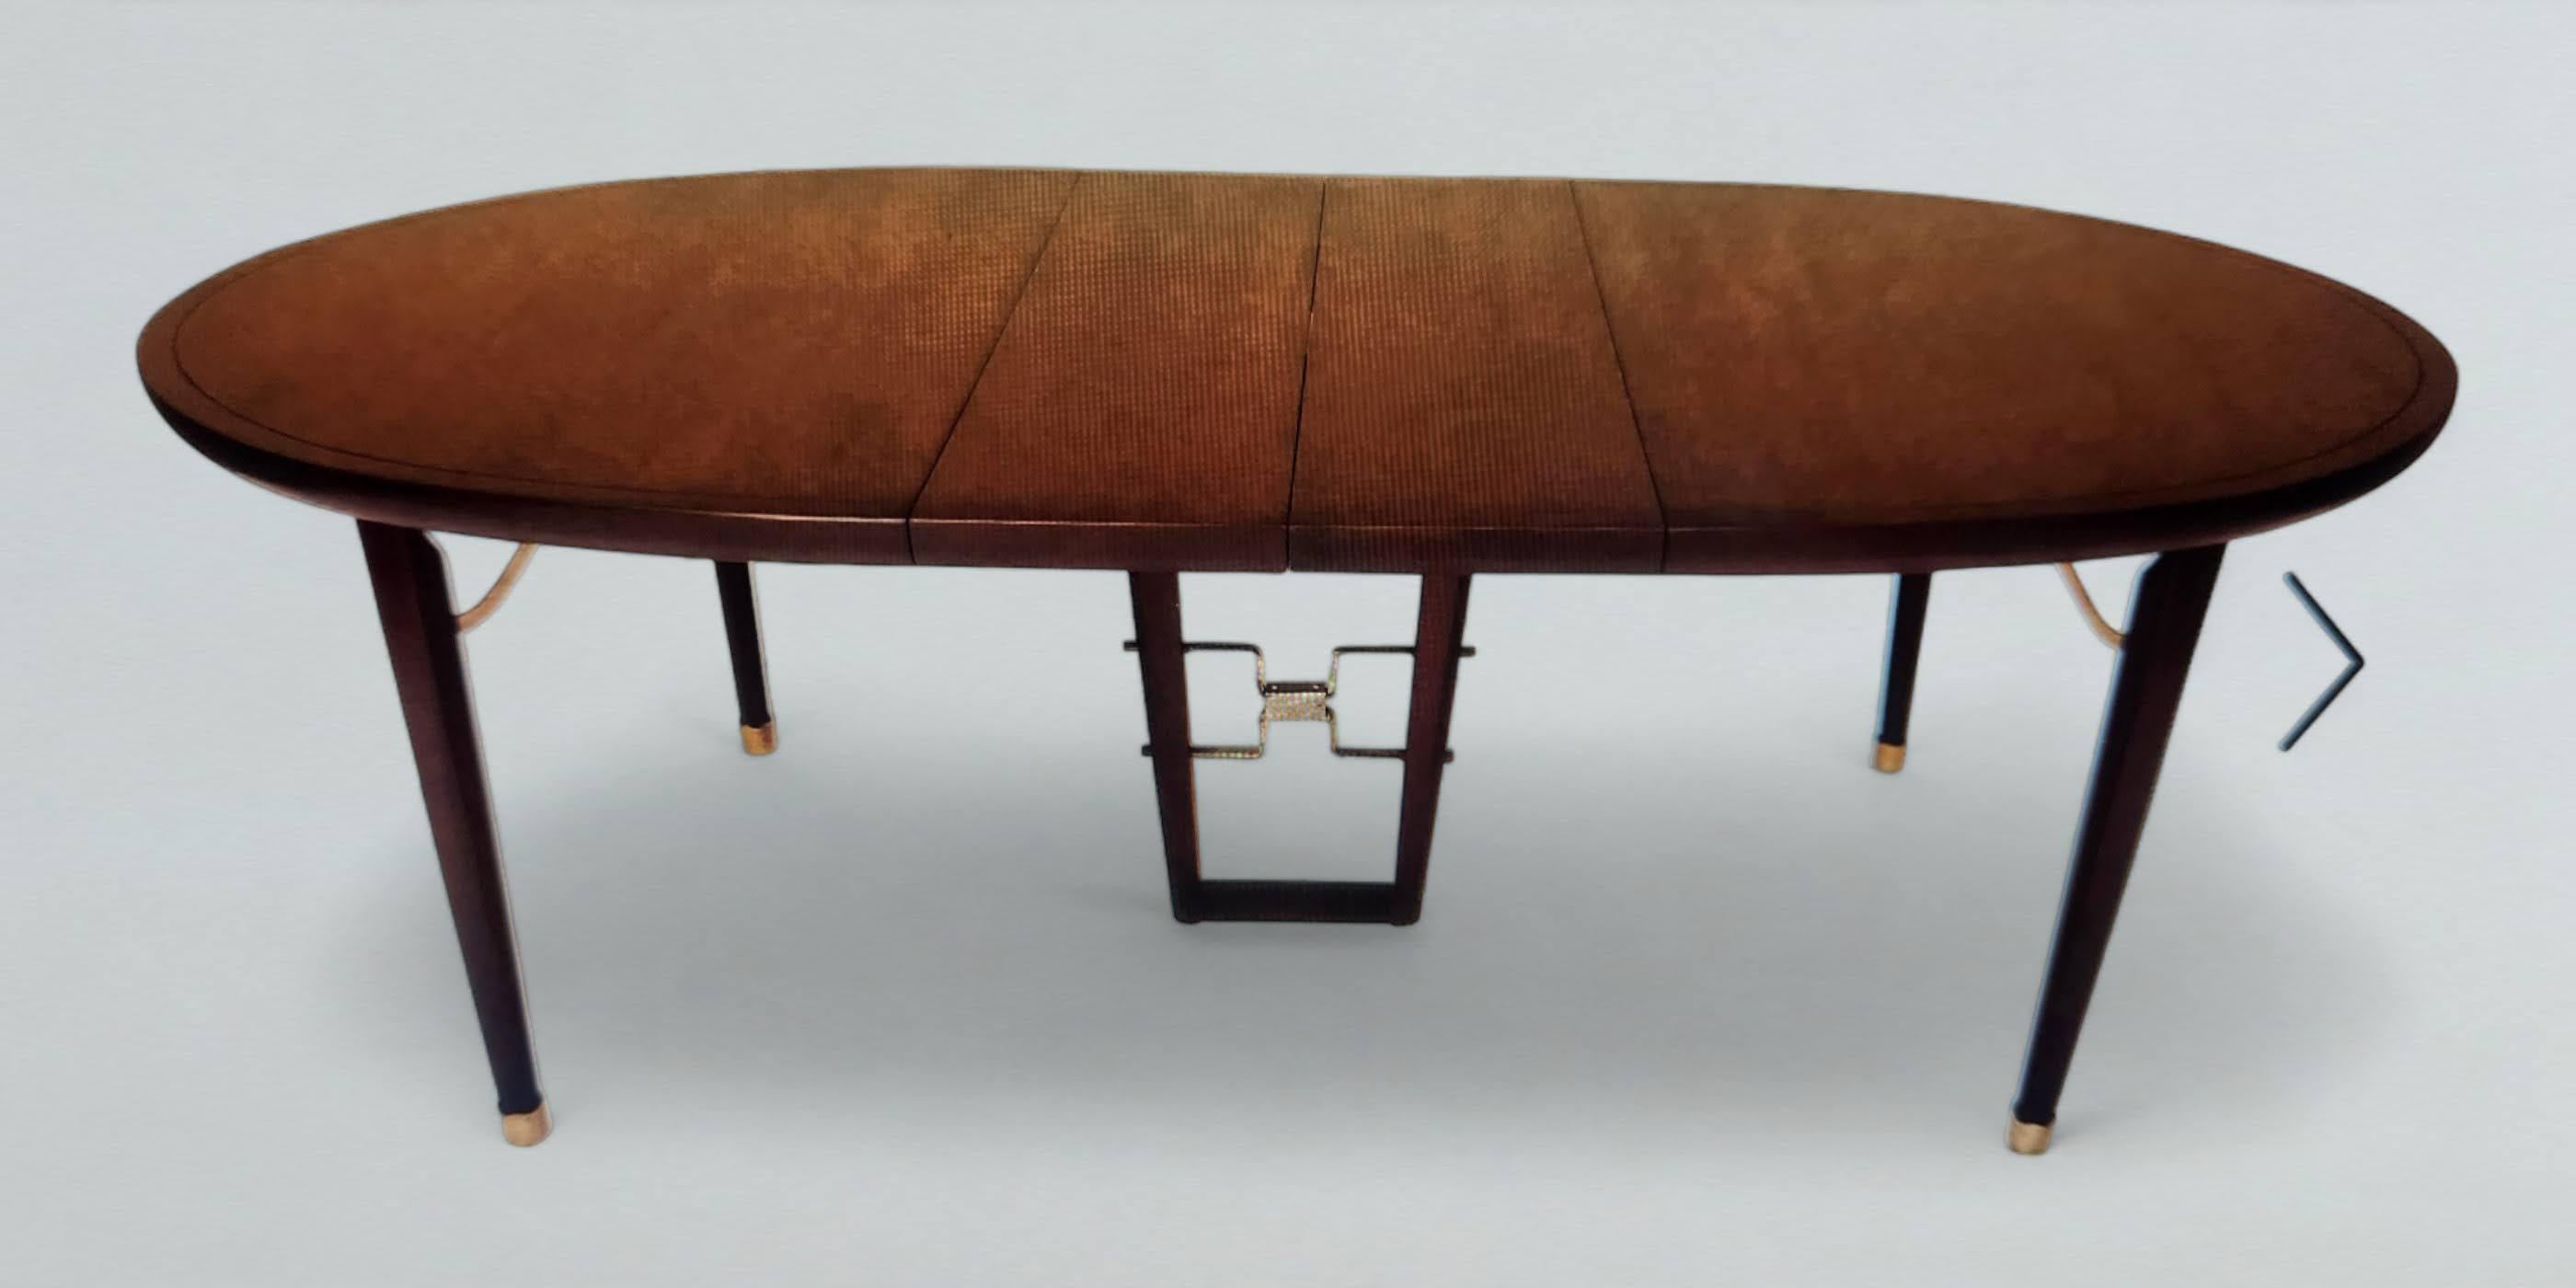 Edmond Spence Six Piece Mahogany Dinning Set for Industria Mueblera, S.A. 1950s  For Sale 1